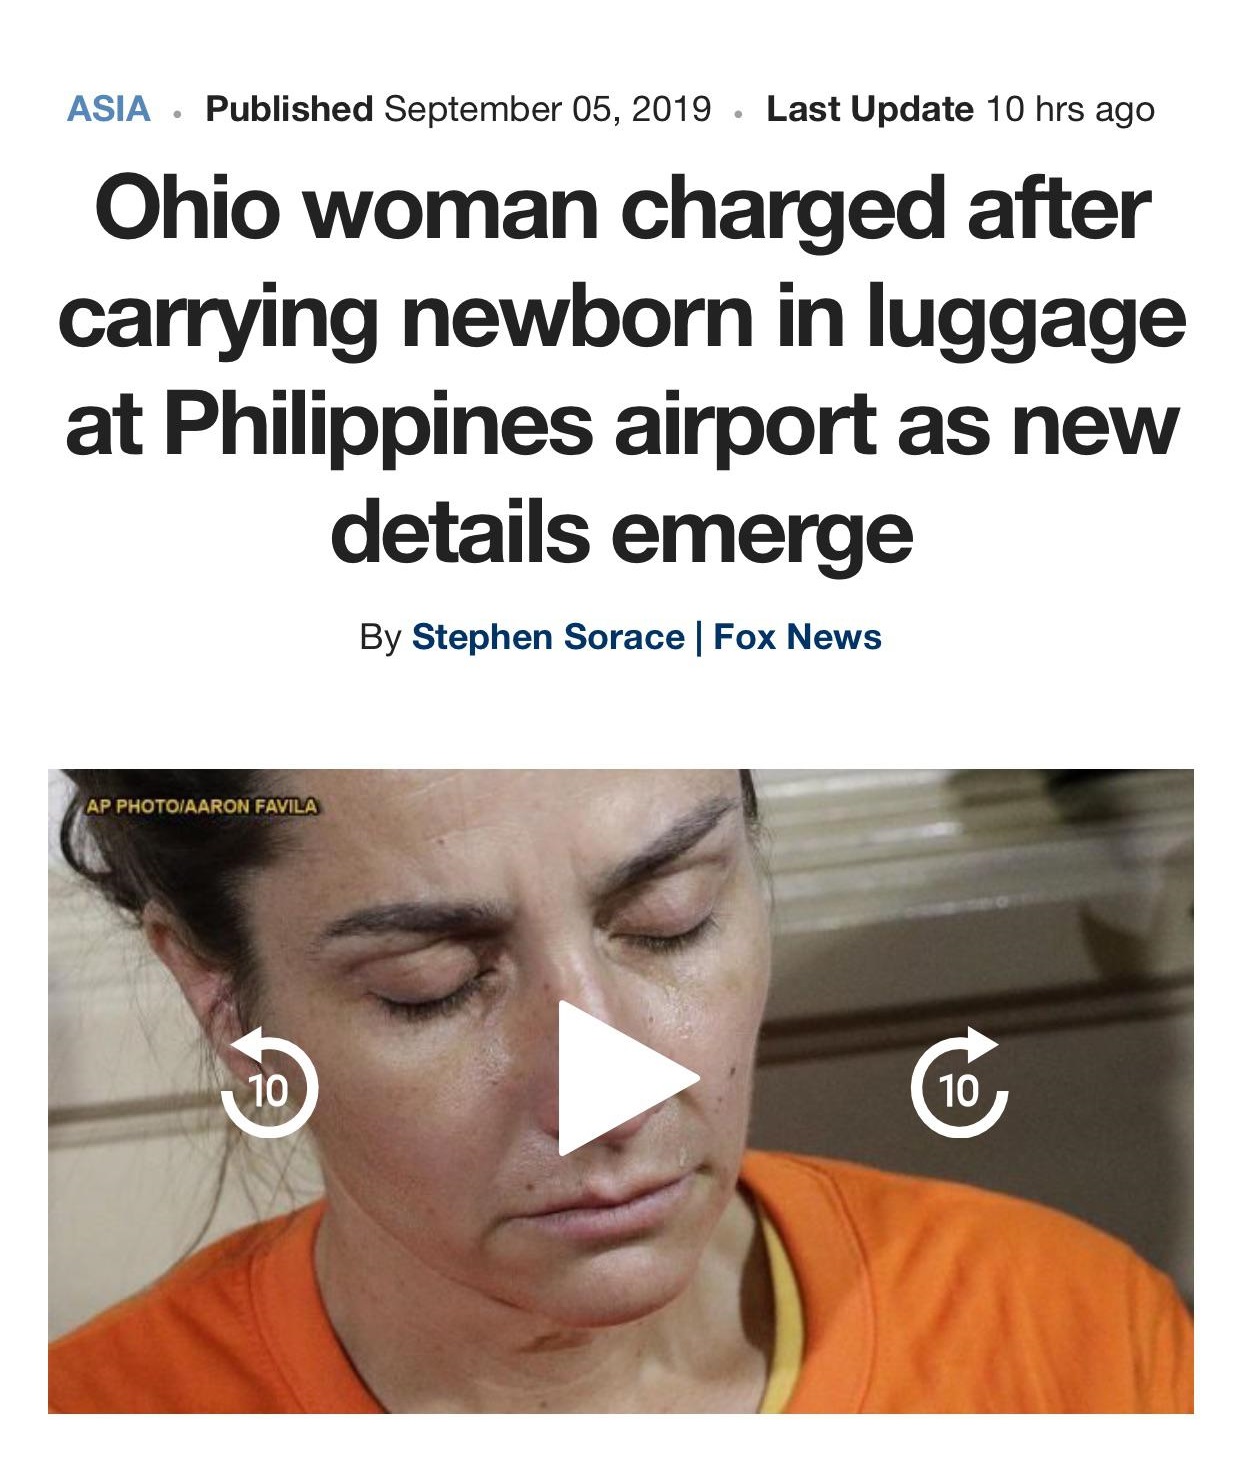 seagate - Asia . Published Last Update 10 hrs ago Ohio woman charged after carrying newborn in luggage at Philippines airport as new details emerge By Stephen Sorace | Fox News Ap Photoiaaron Favila